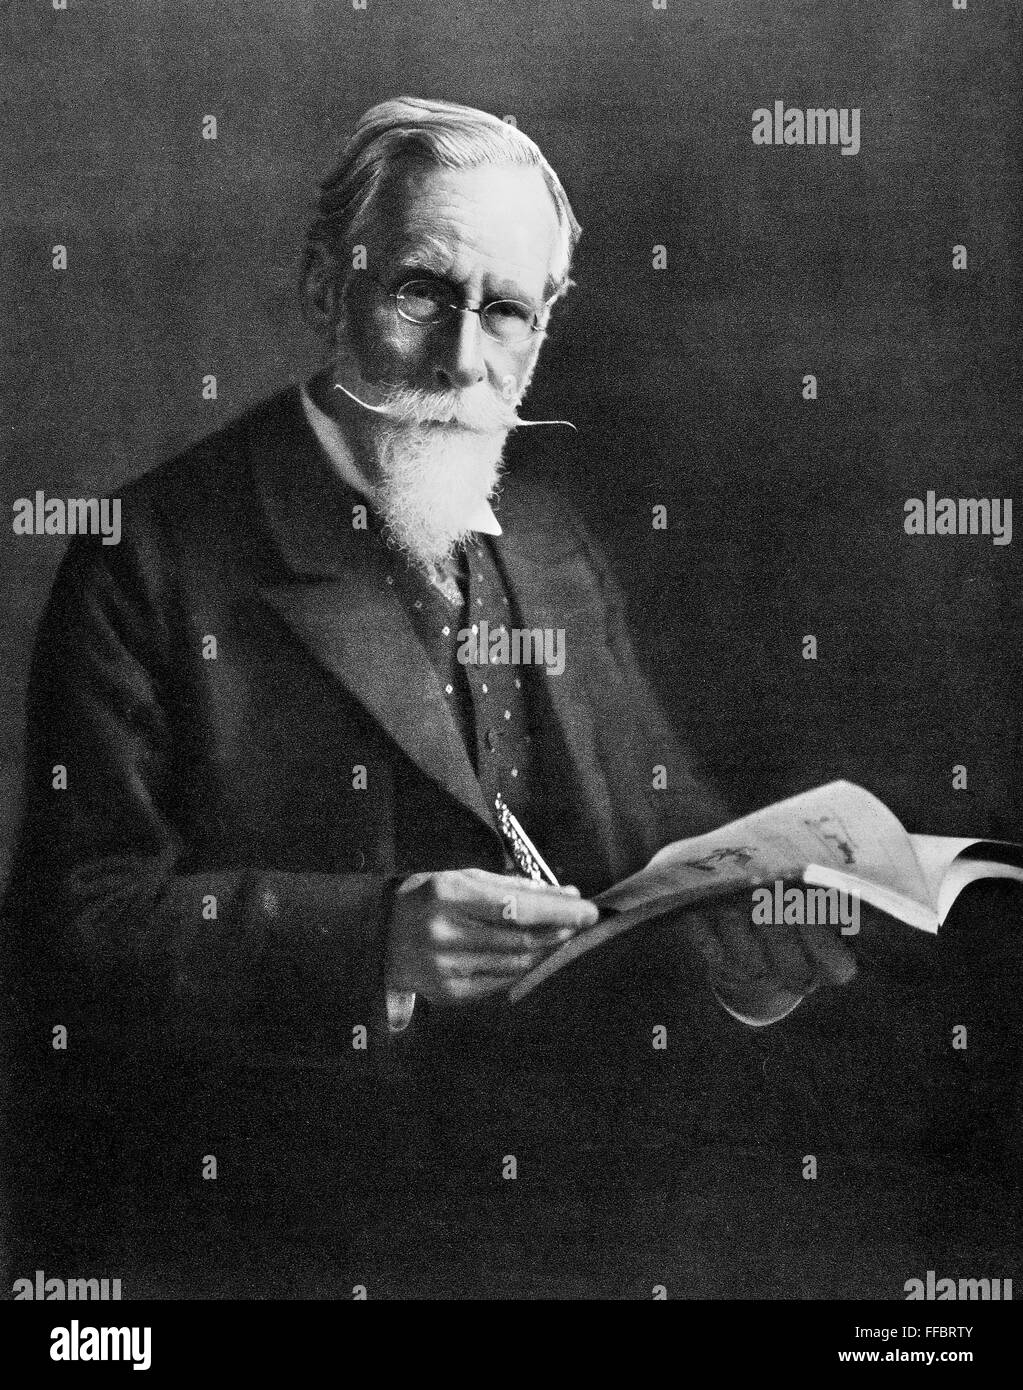 SIR WILLIAM CROOKES /n(1832-1919). British chemist and physicist. Photographed c1913. Stock Photo